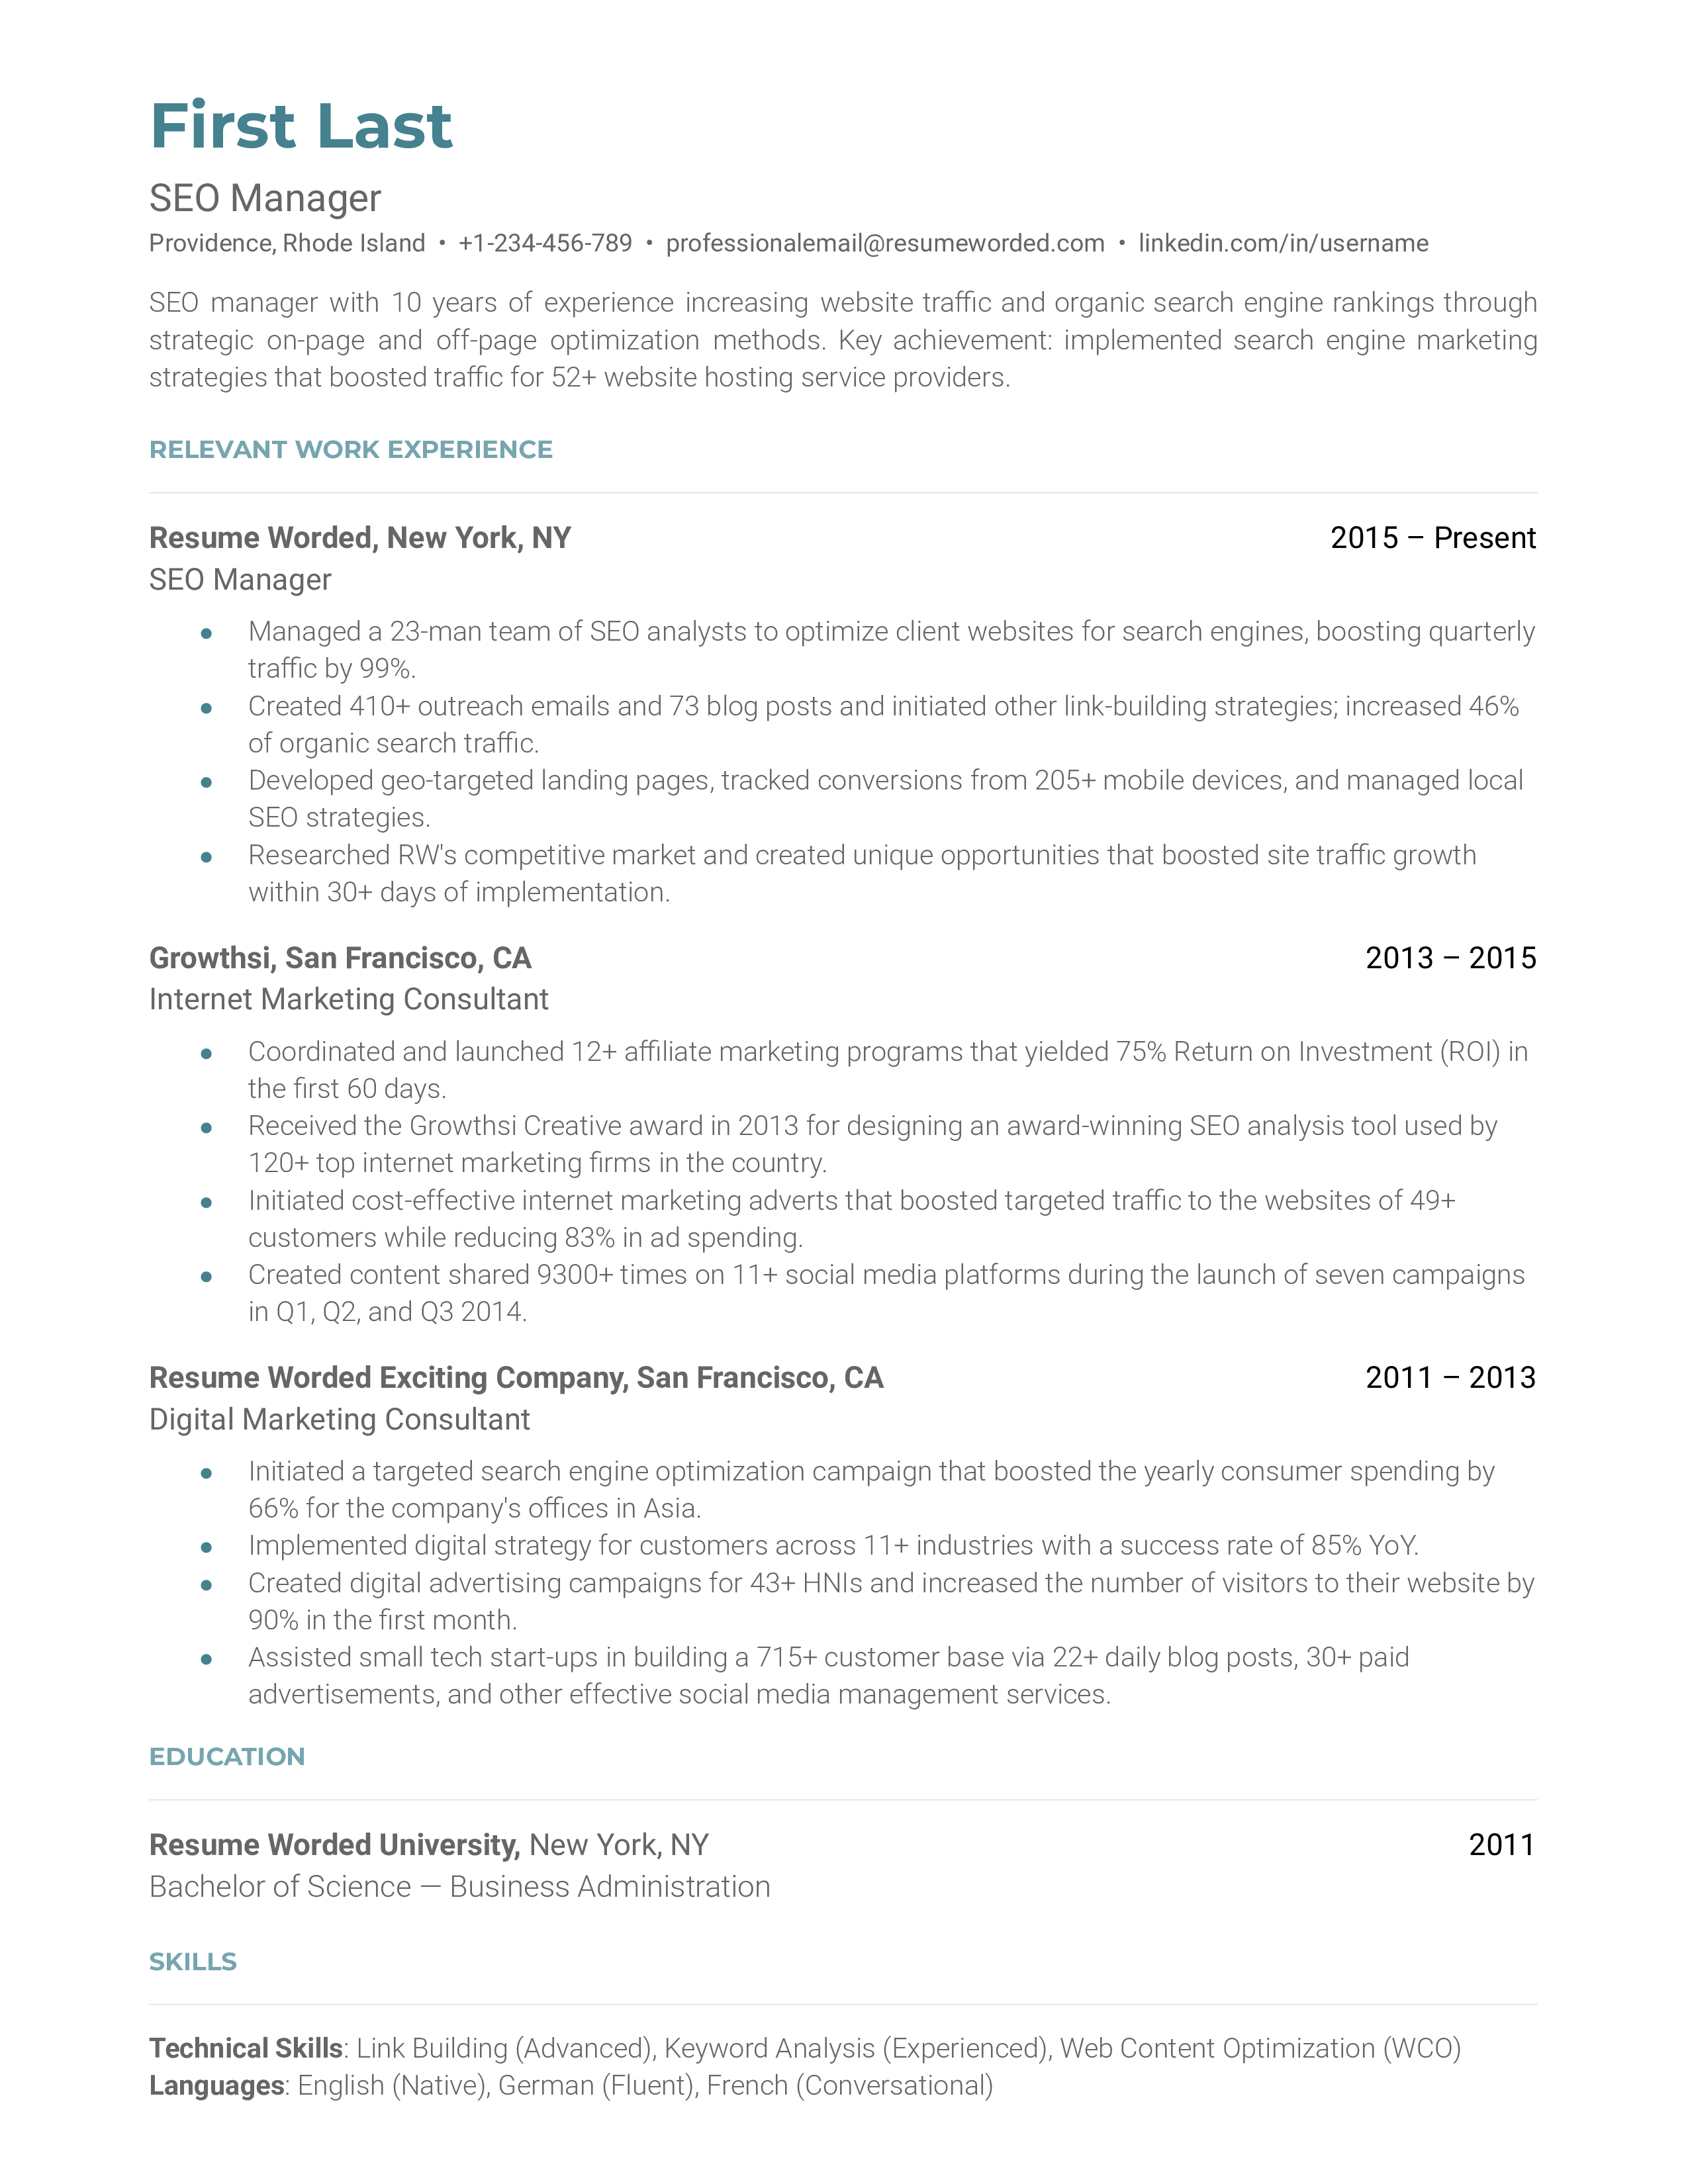 A well-structured CV for an SEO Manager displaying proficiency in algorithms and keyword optimization.